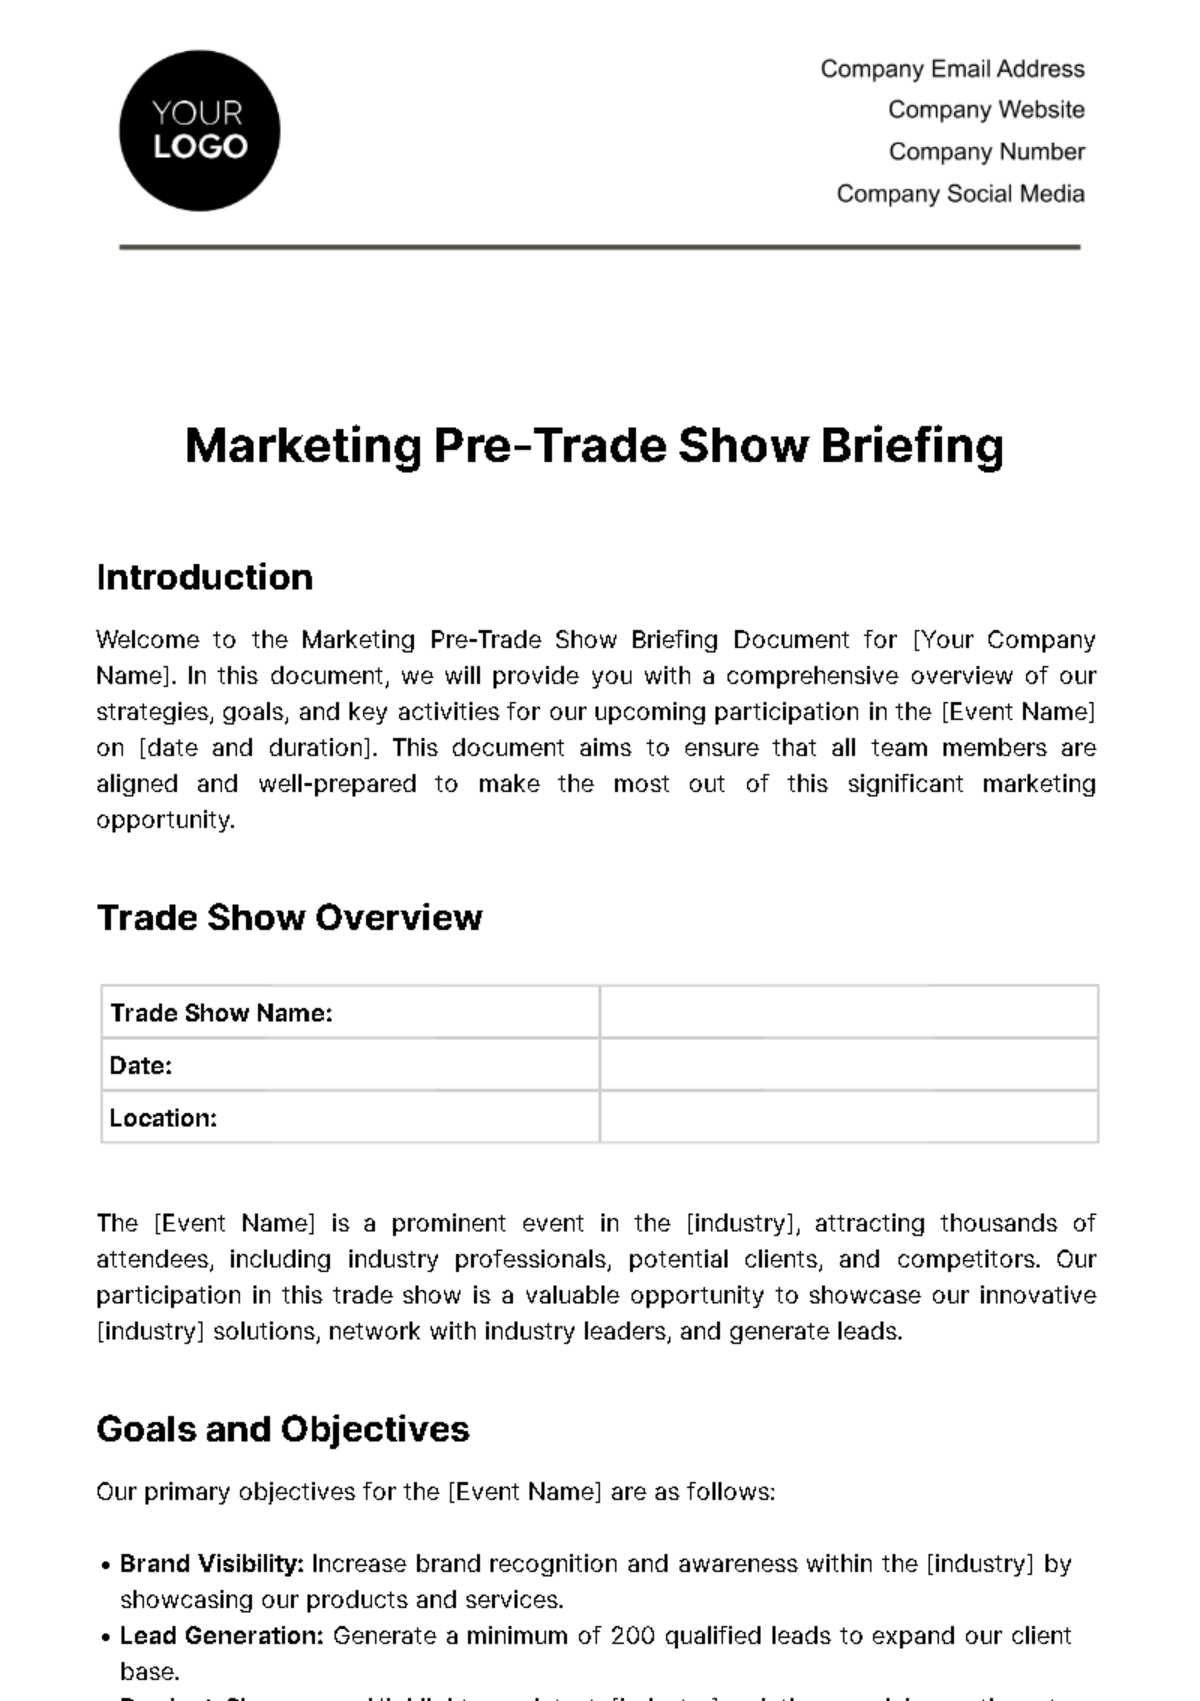 Free Marketing Pre-Trade Show Briefing Document Template